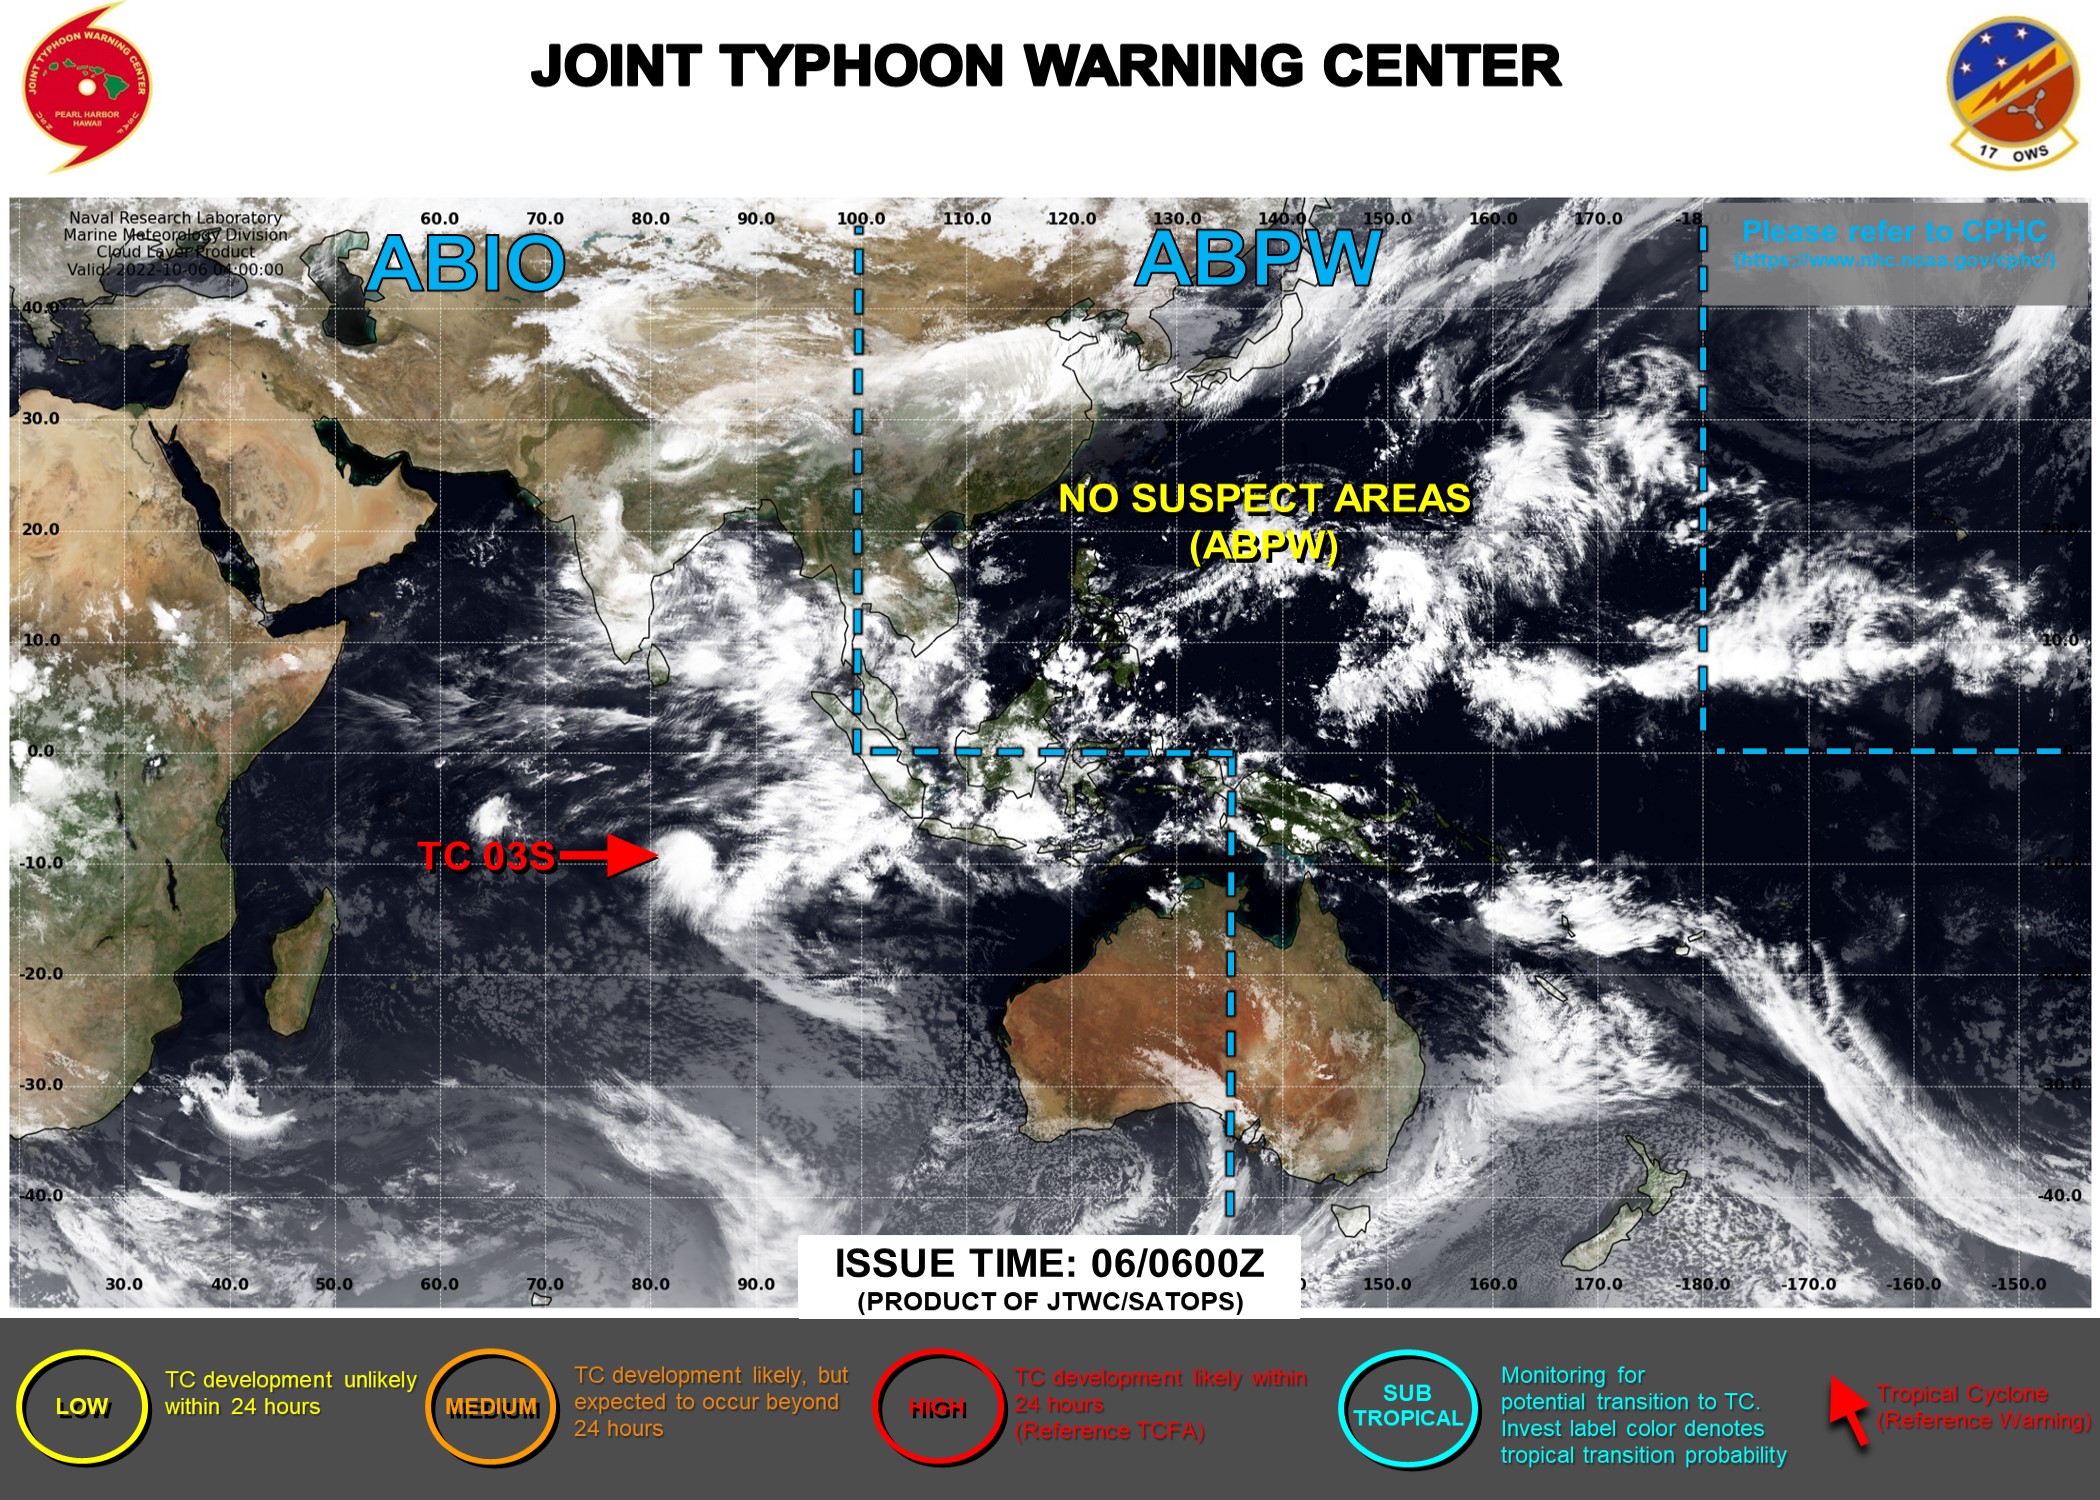 JTWC IS ISSUING 12HOURLY WARNINGS AND 3HOURLY SATELLITE BULLETINS ON TC 03S.